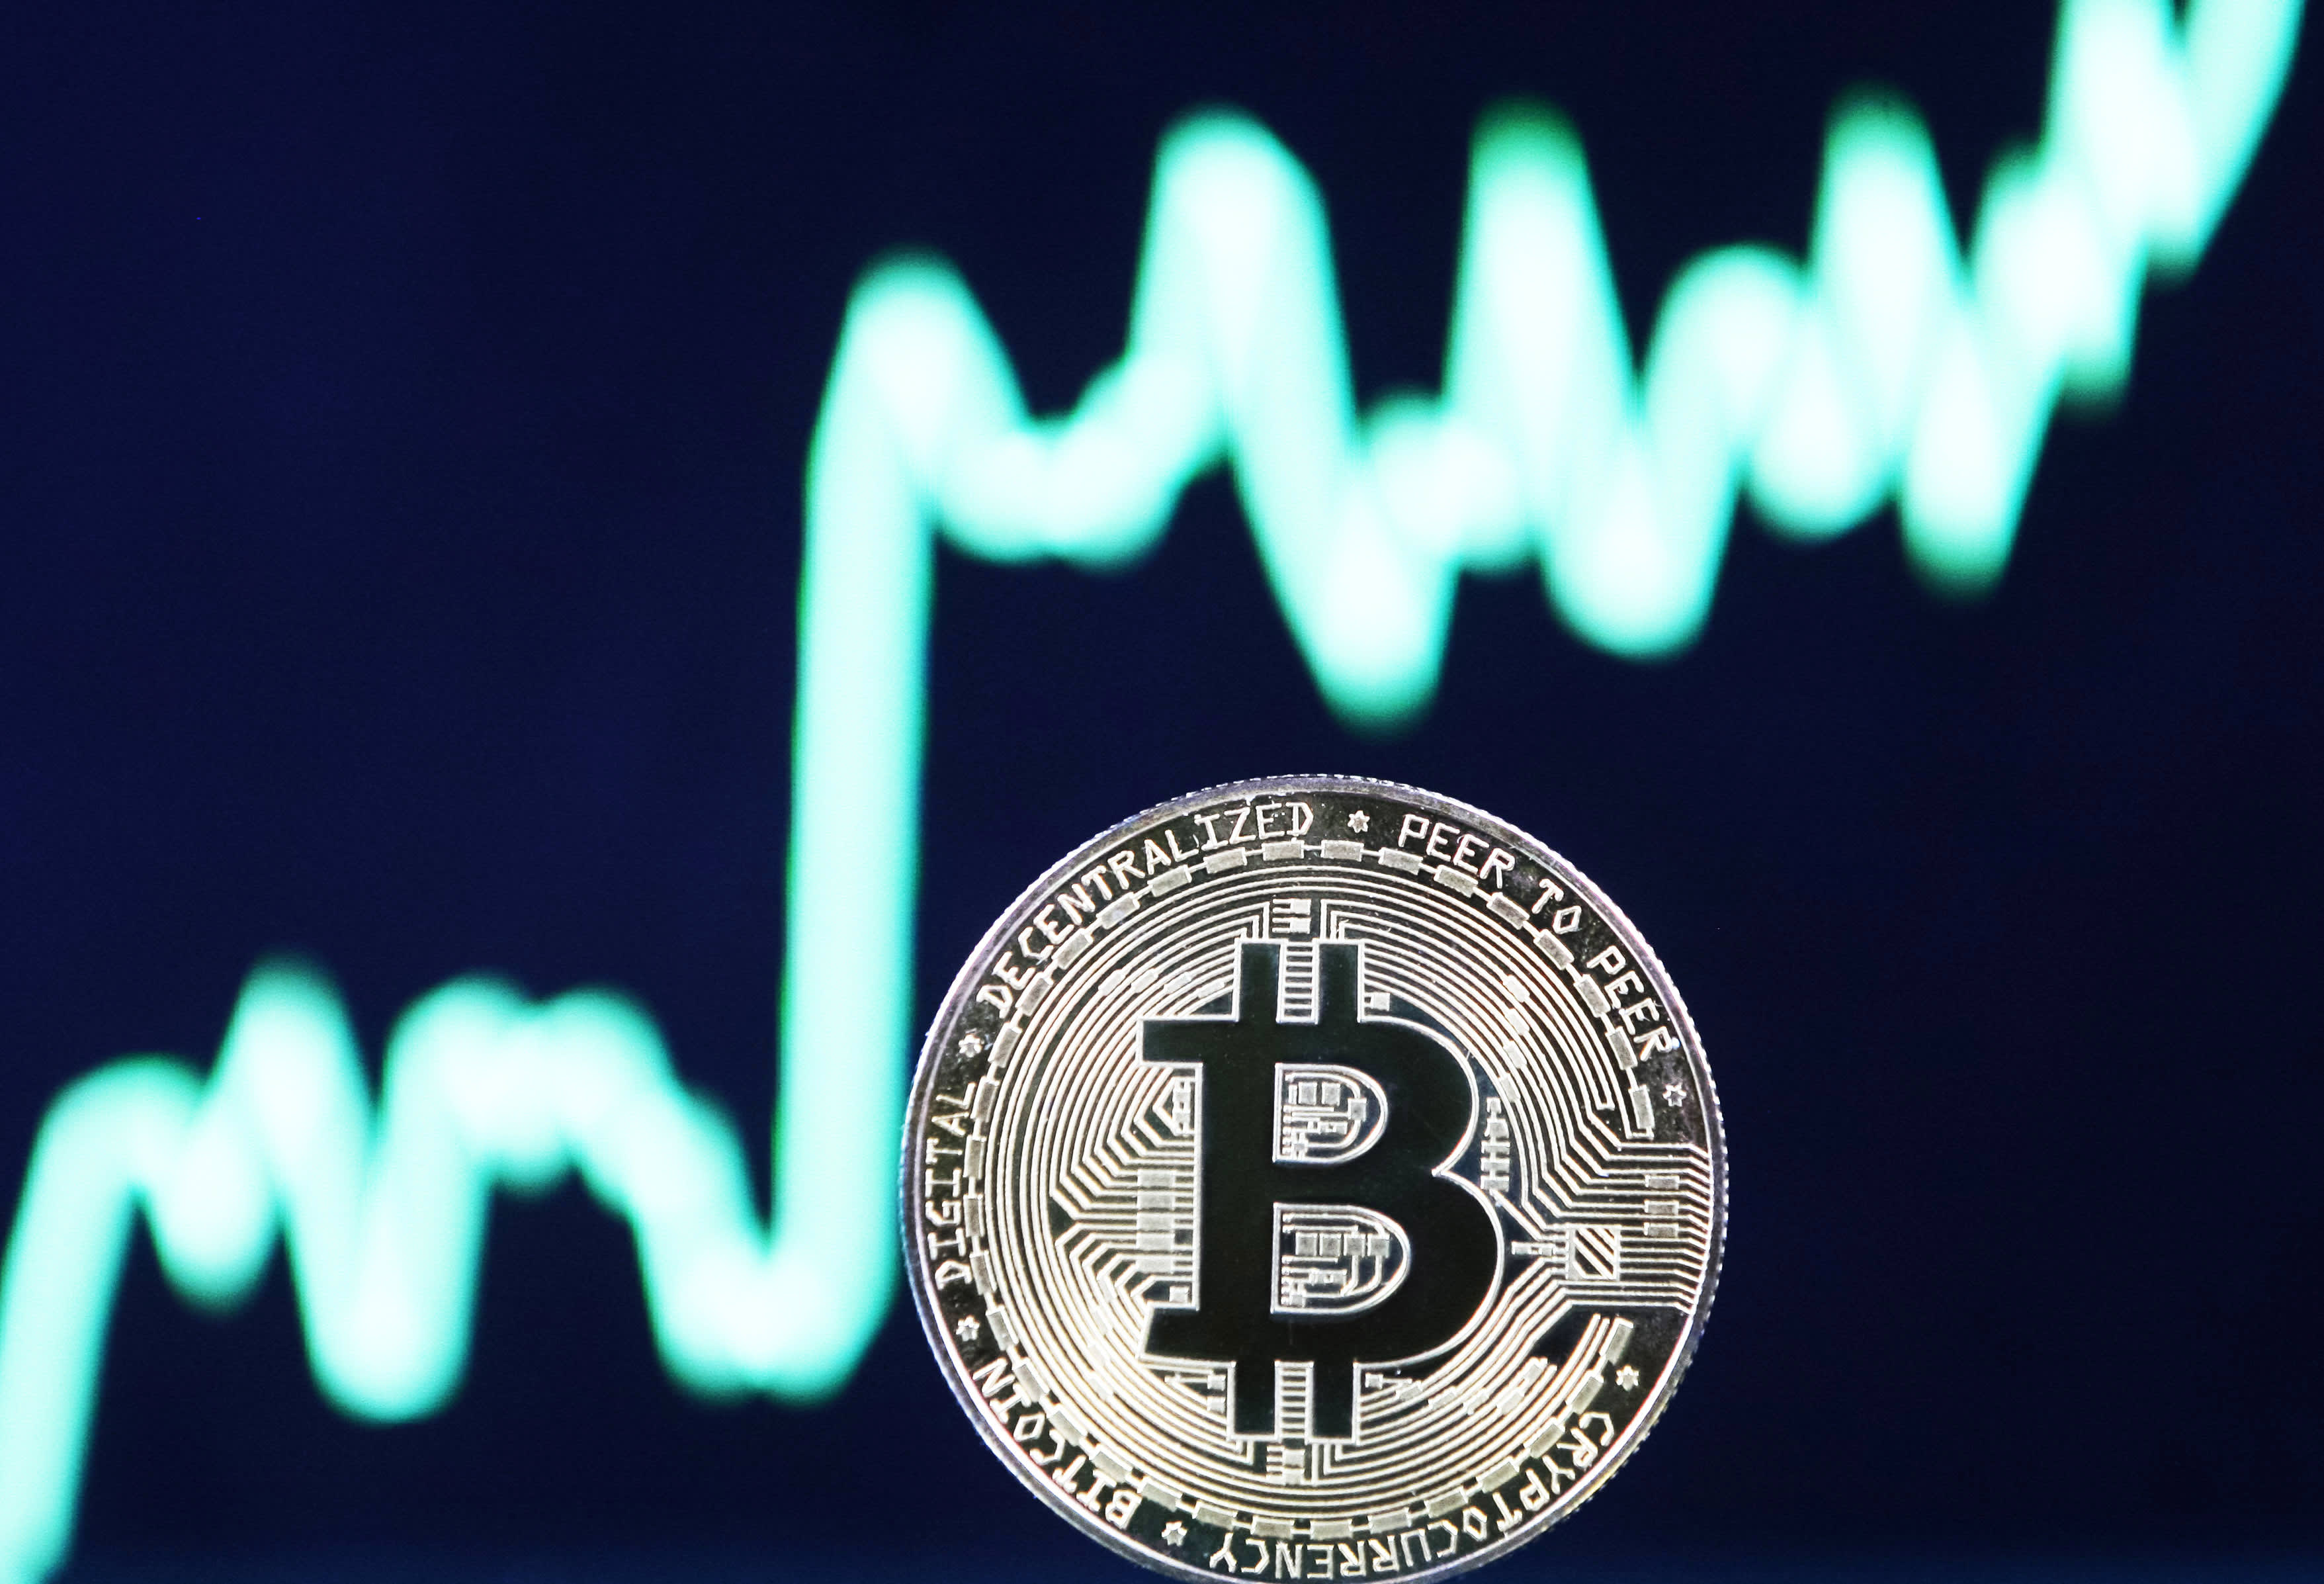 January was bitcoin's best month since 2021, but crypto isn't ready for a 'rocket ship rally' yet